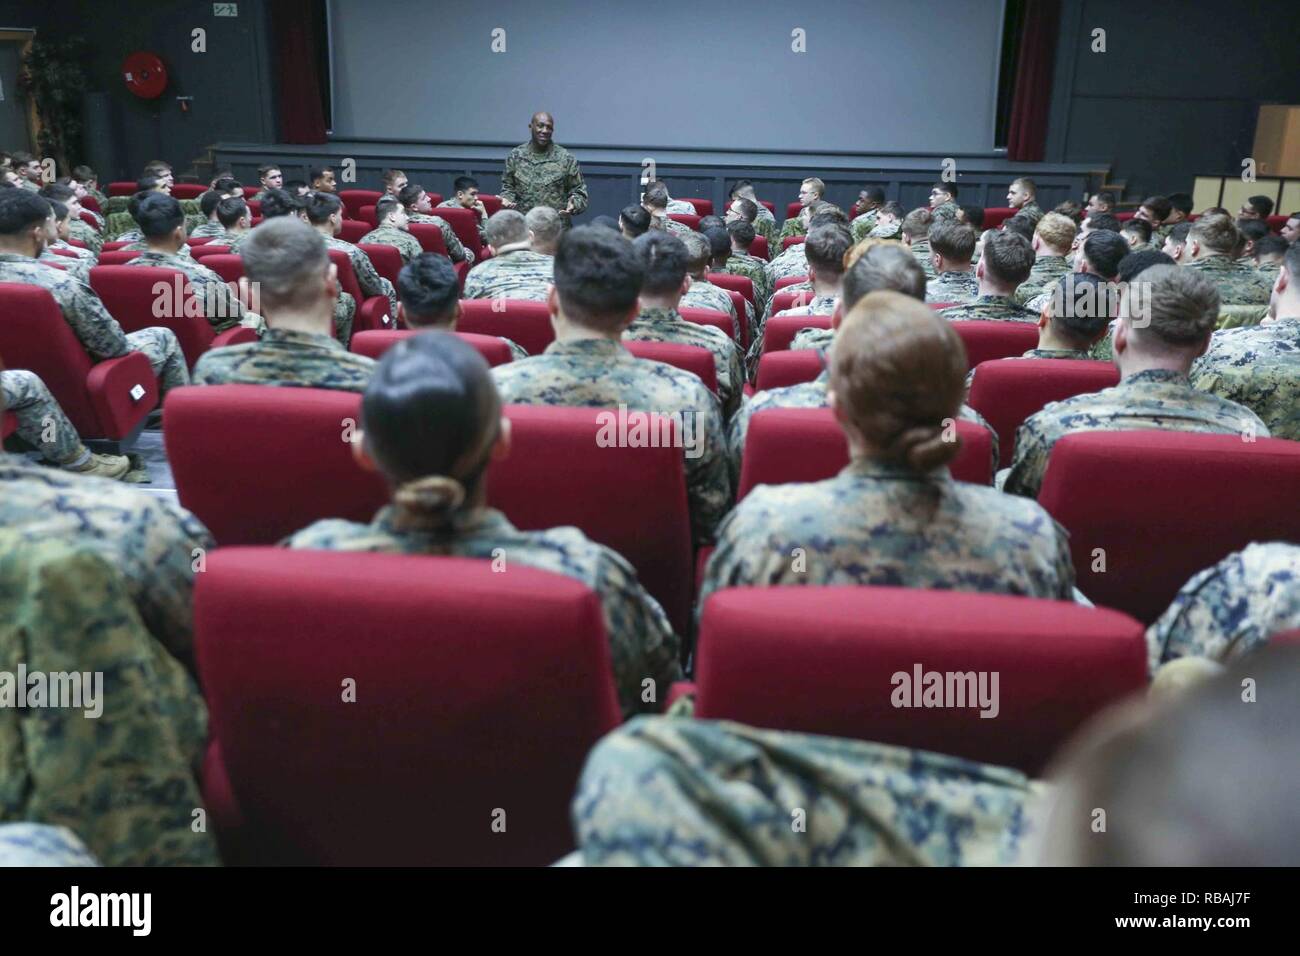 Sergeant Major of the Marine Corps Sgt. Maj. Ronald L. Green speaks to Marines and Sailors during a town hall in Setermoen, Norway, Dec. 20, 2018. Sgt. Maj. Green visited deployed service members in Europe, Southwest Asia, and the Middle East during the holiday season. Stock Photo